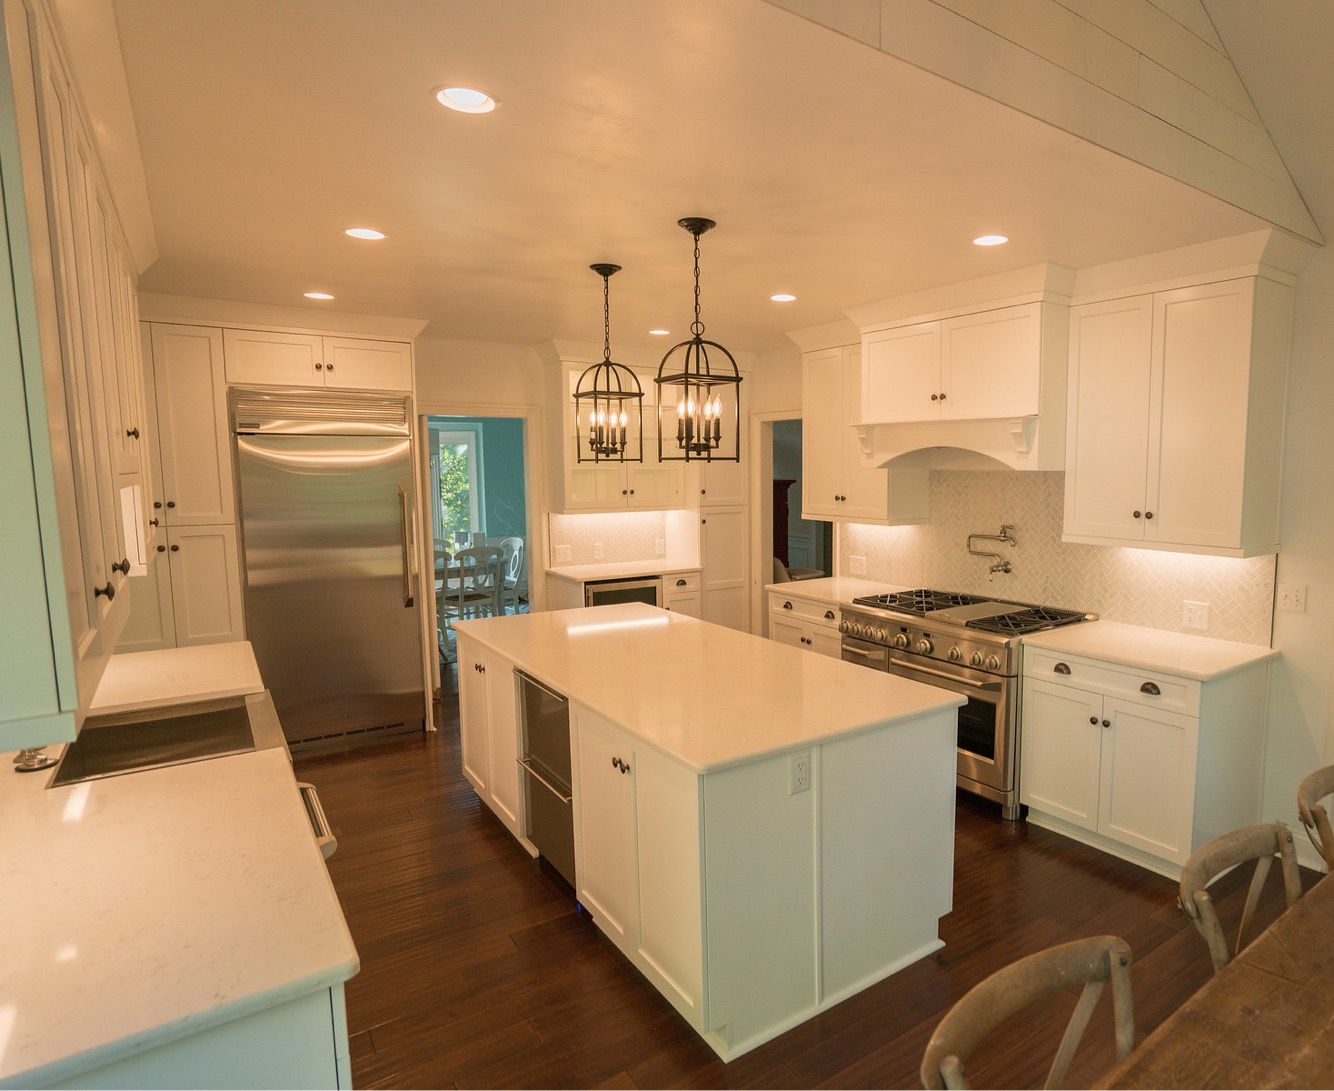 Classic whit kitchen, white wall and base cabinets, white countertop island, brown floor tiles